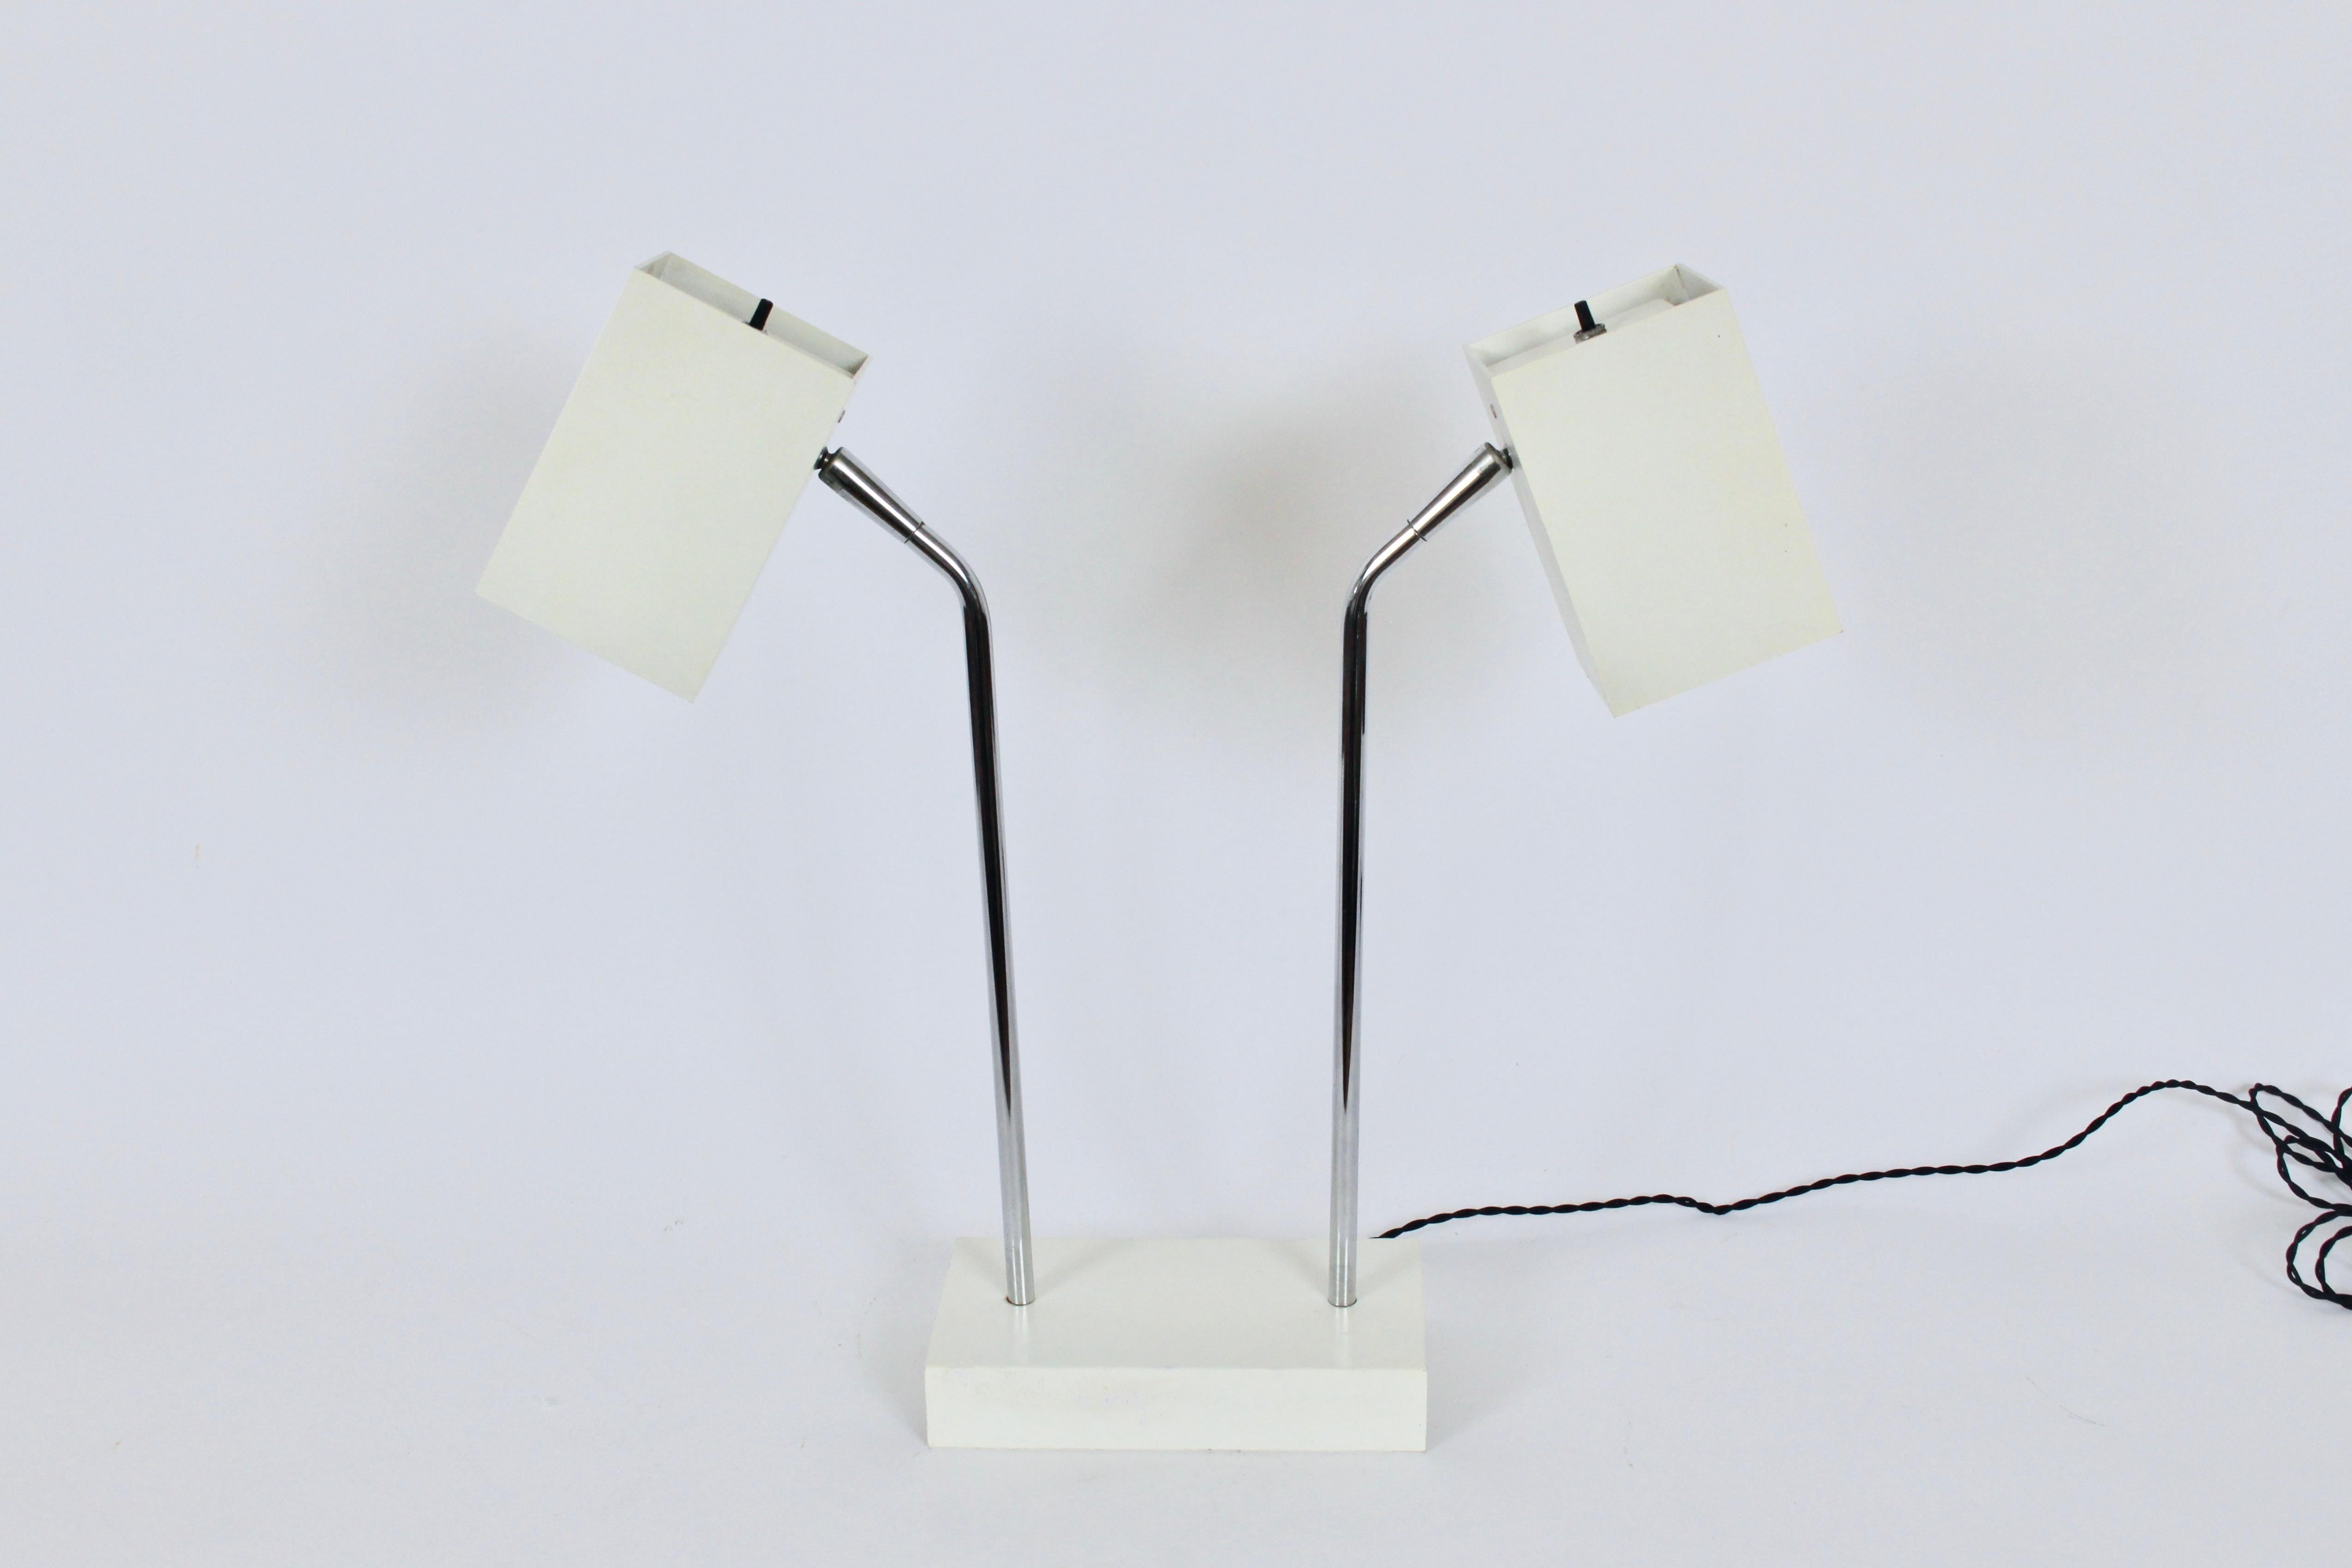 Robert Sonneman for George Kovacs enameled off white metal double box head table lamp.  Featuring angled chrome arms, cubed enameled adjustable, rotating and pivoting off white enameled metal heads, atop a rectangular, off white enameled steel base